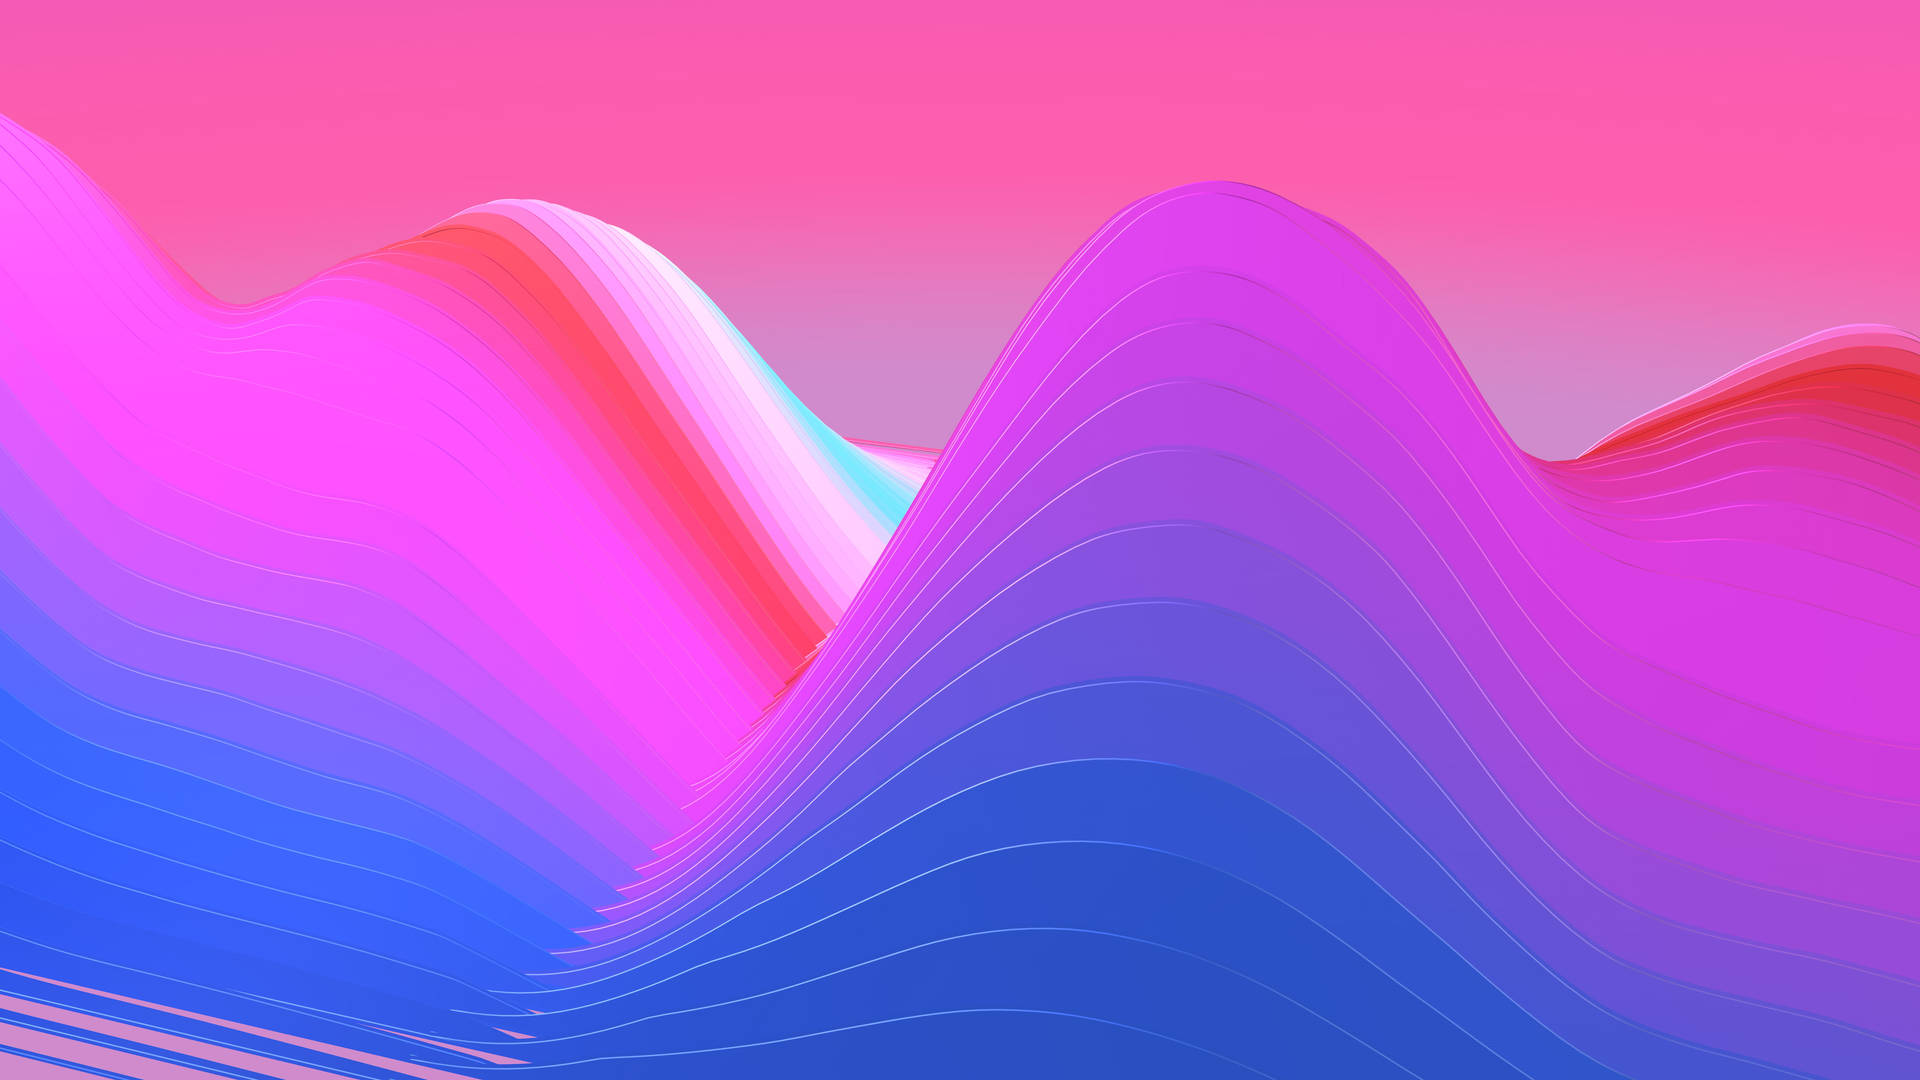 Multicolored Waves Iphone X Amoled Wallpaper